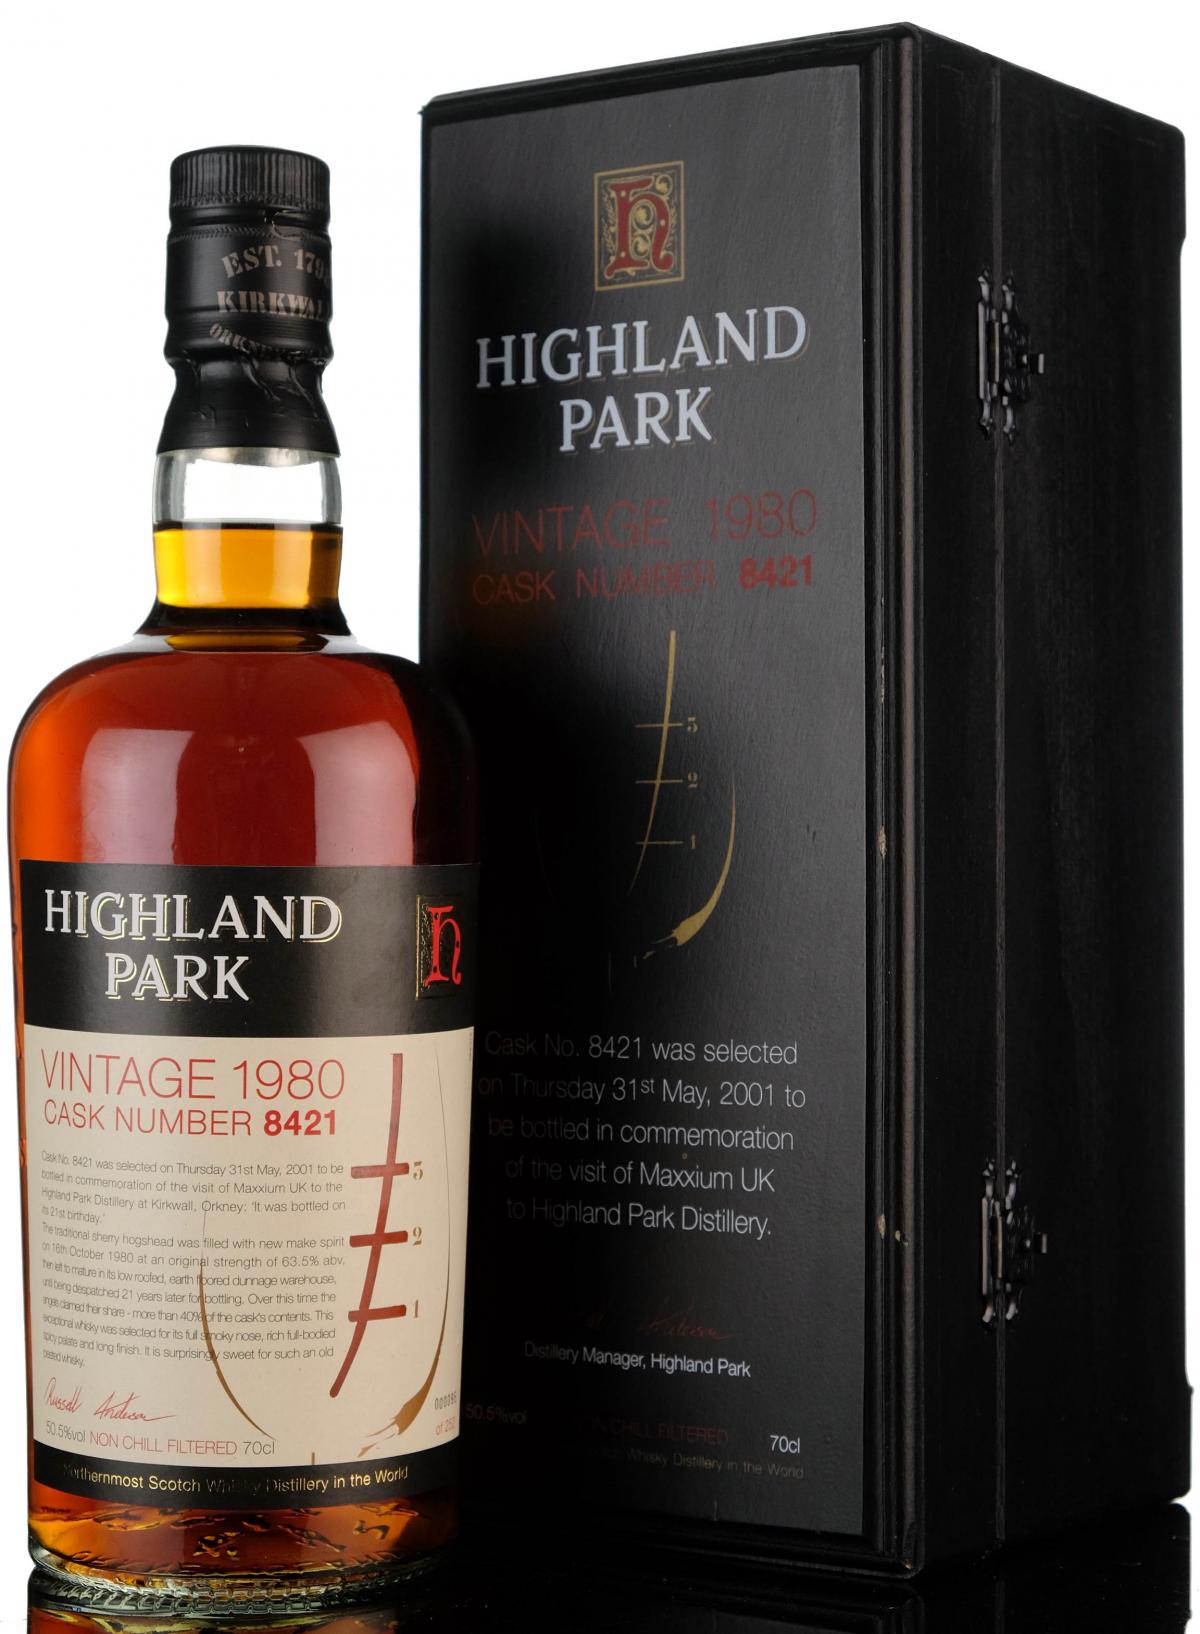 Highland Park 1980-2001 - 21 Year Old - Single Cask 8421 - Maxxium UK Visit Exclusive